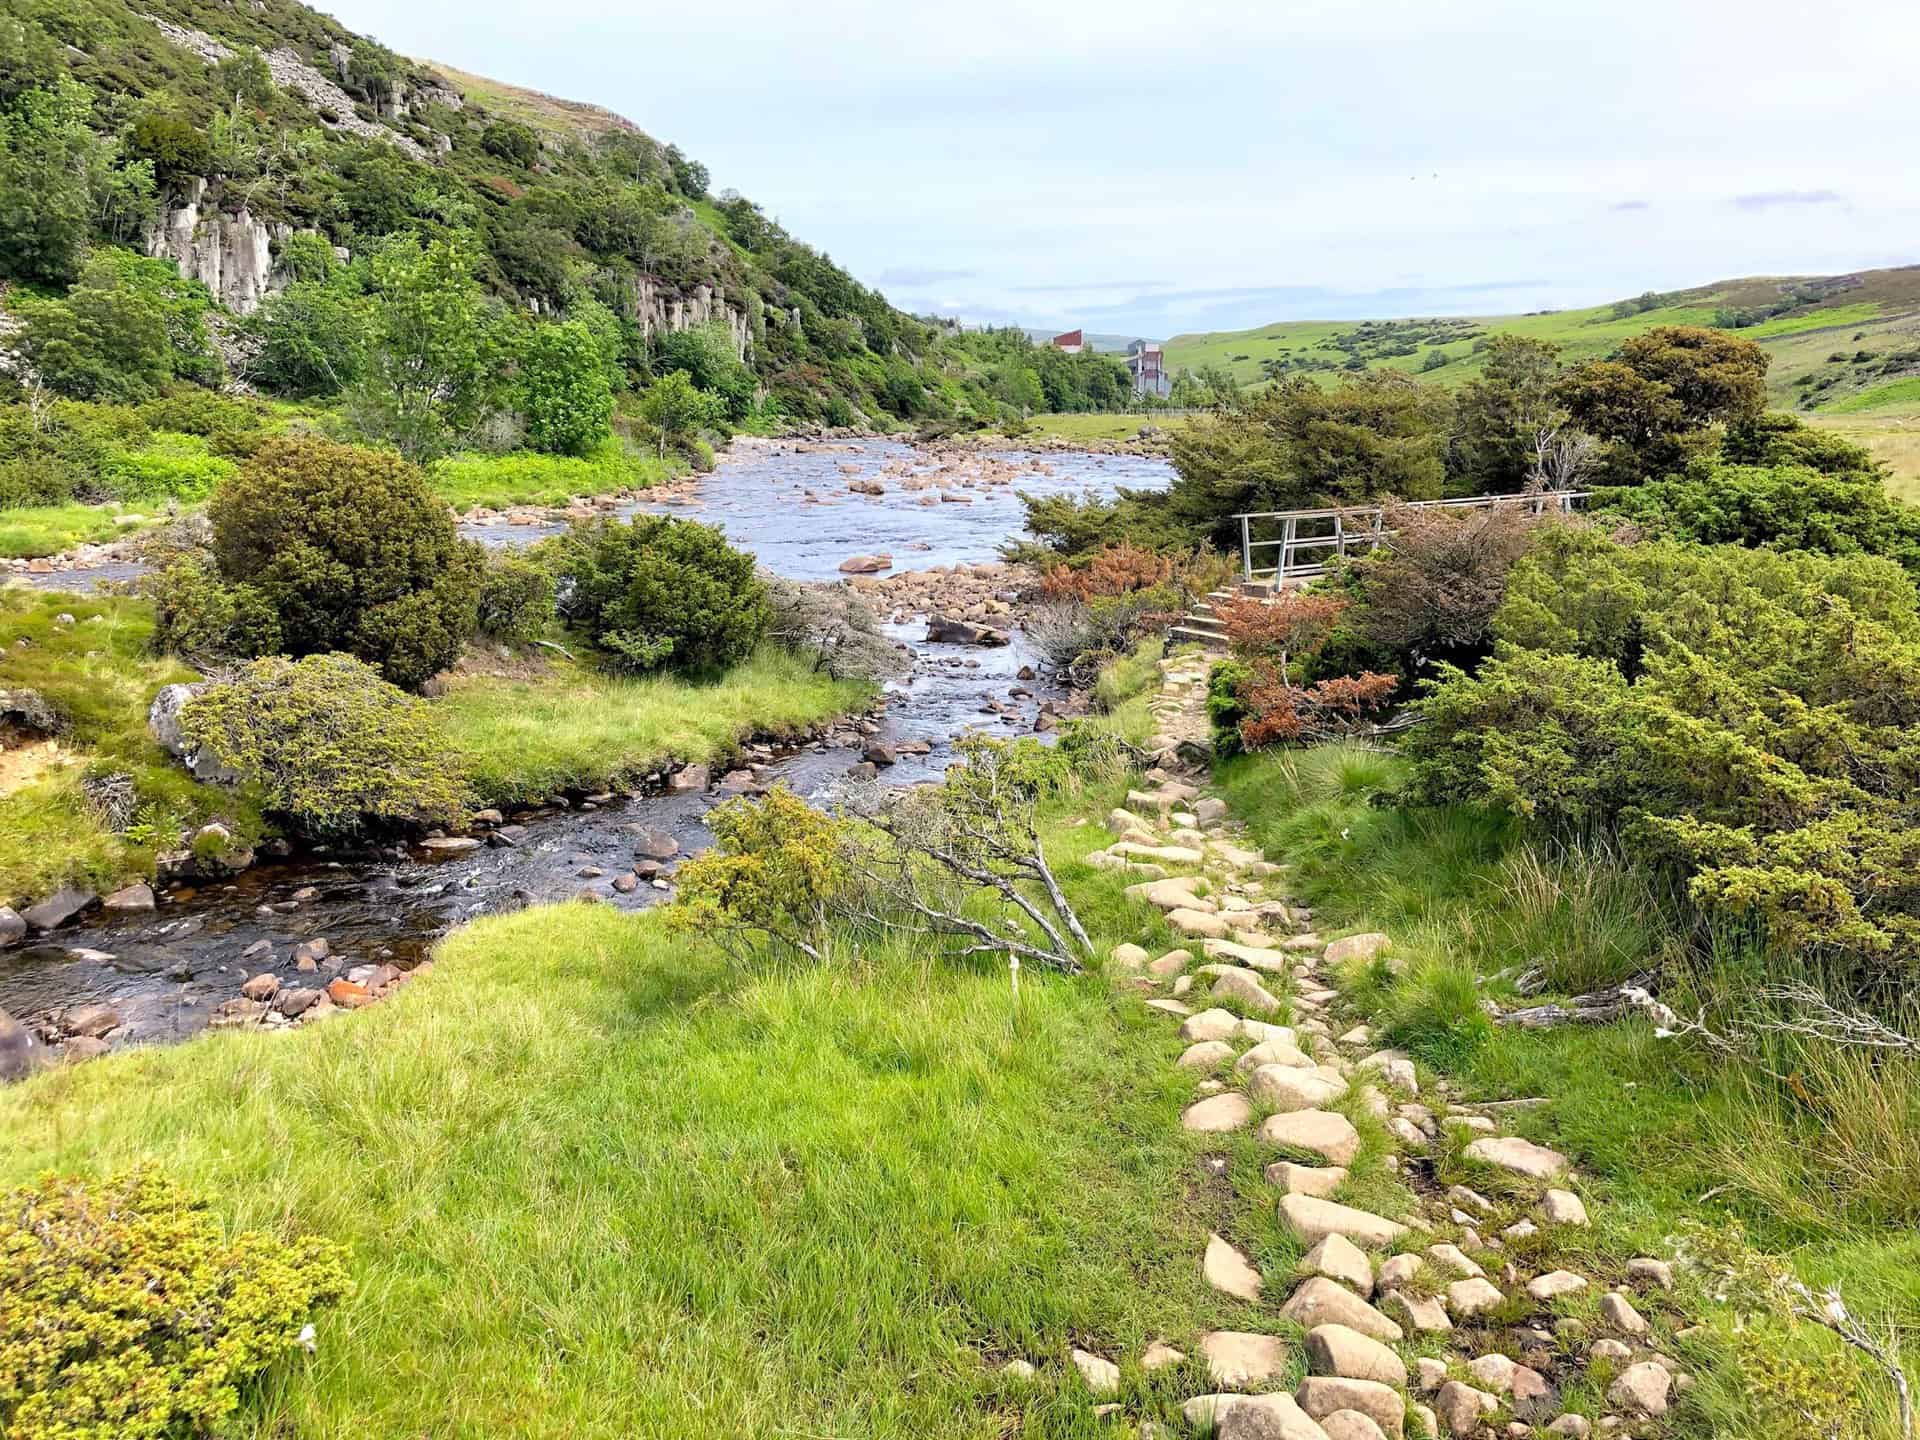 The Pennine Way meanders alongside the River Tees, offering a serene path below the towering Dine Holm Scar.